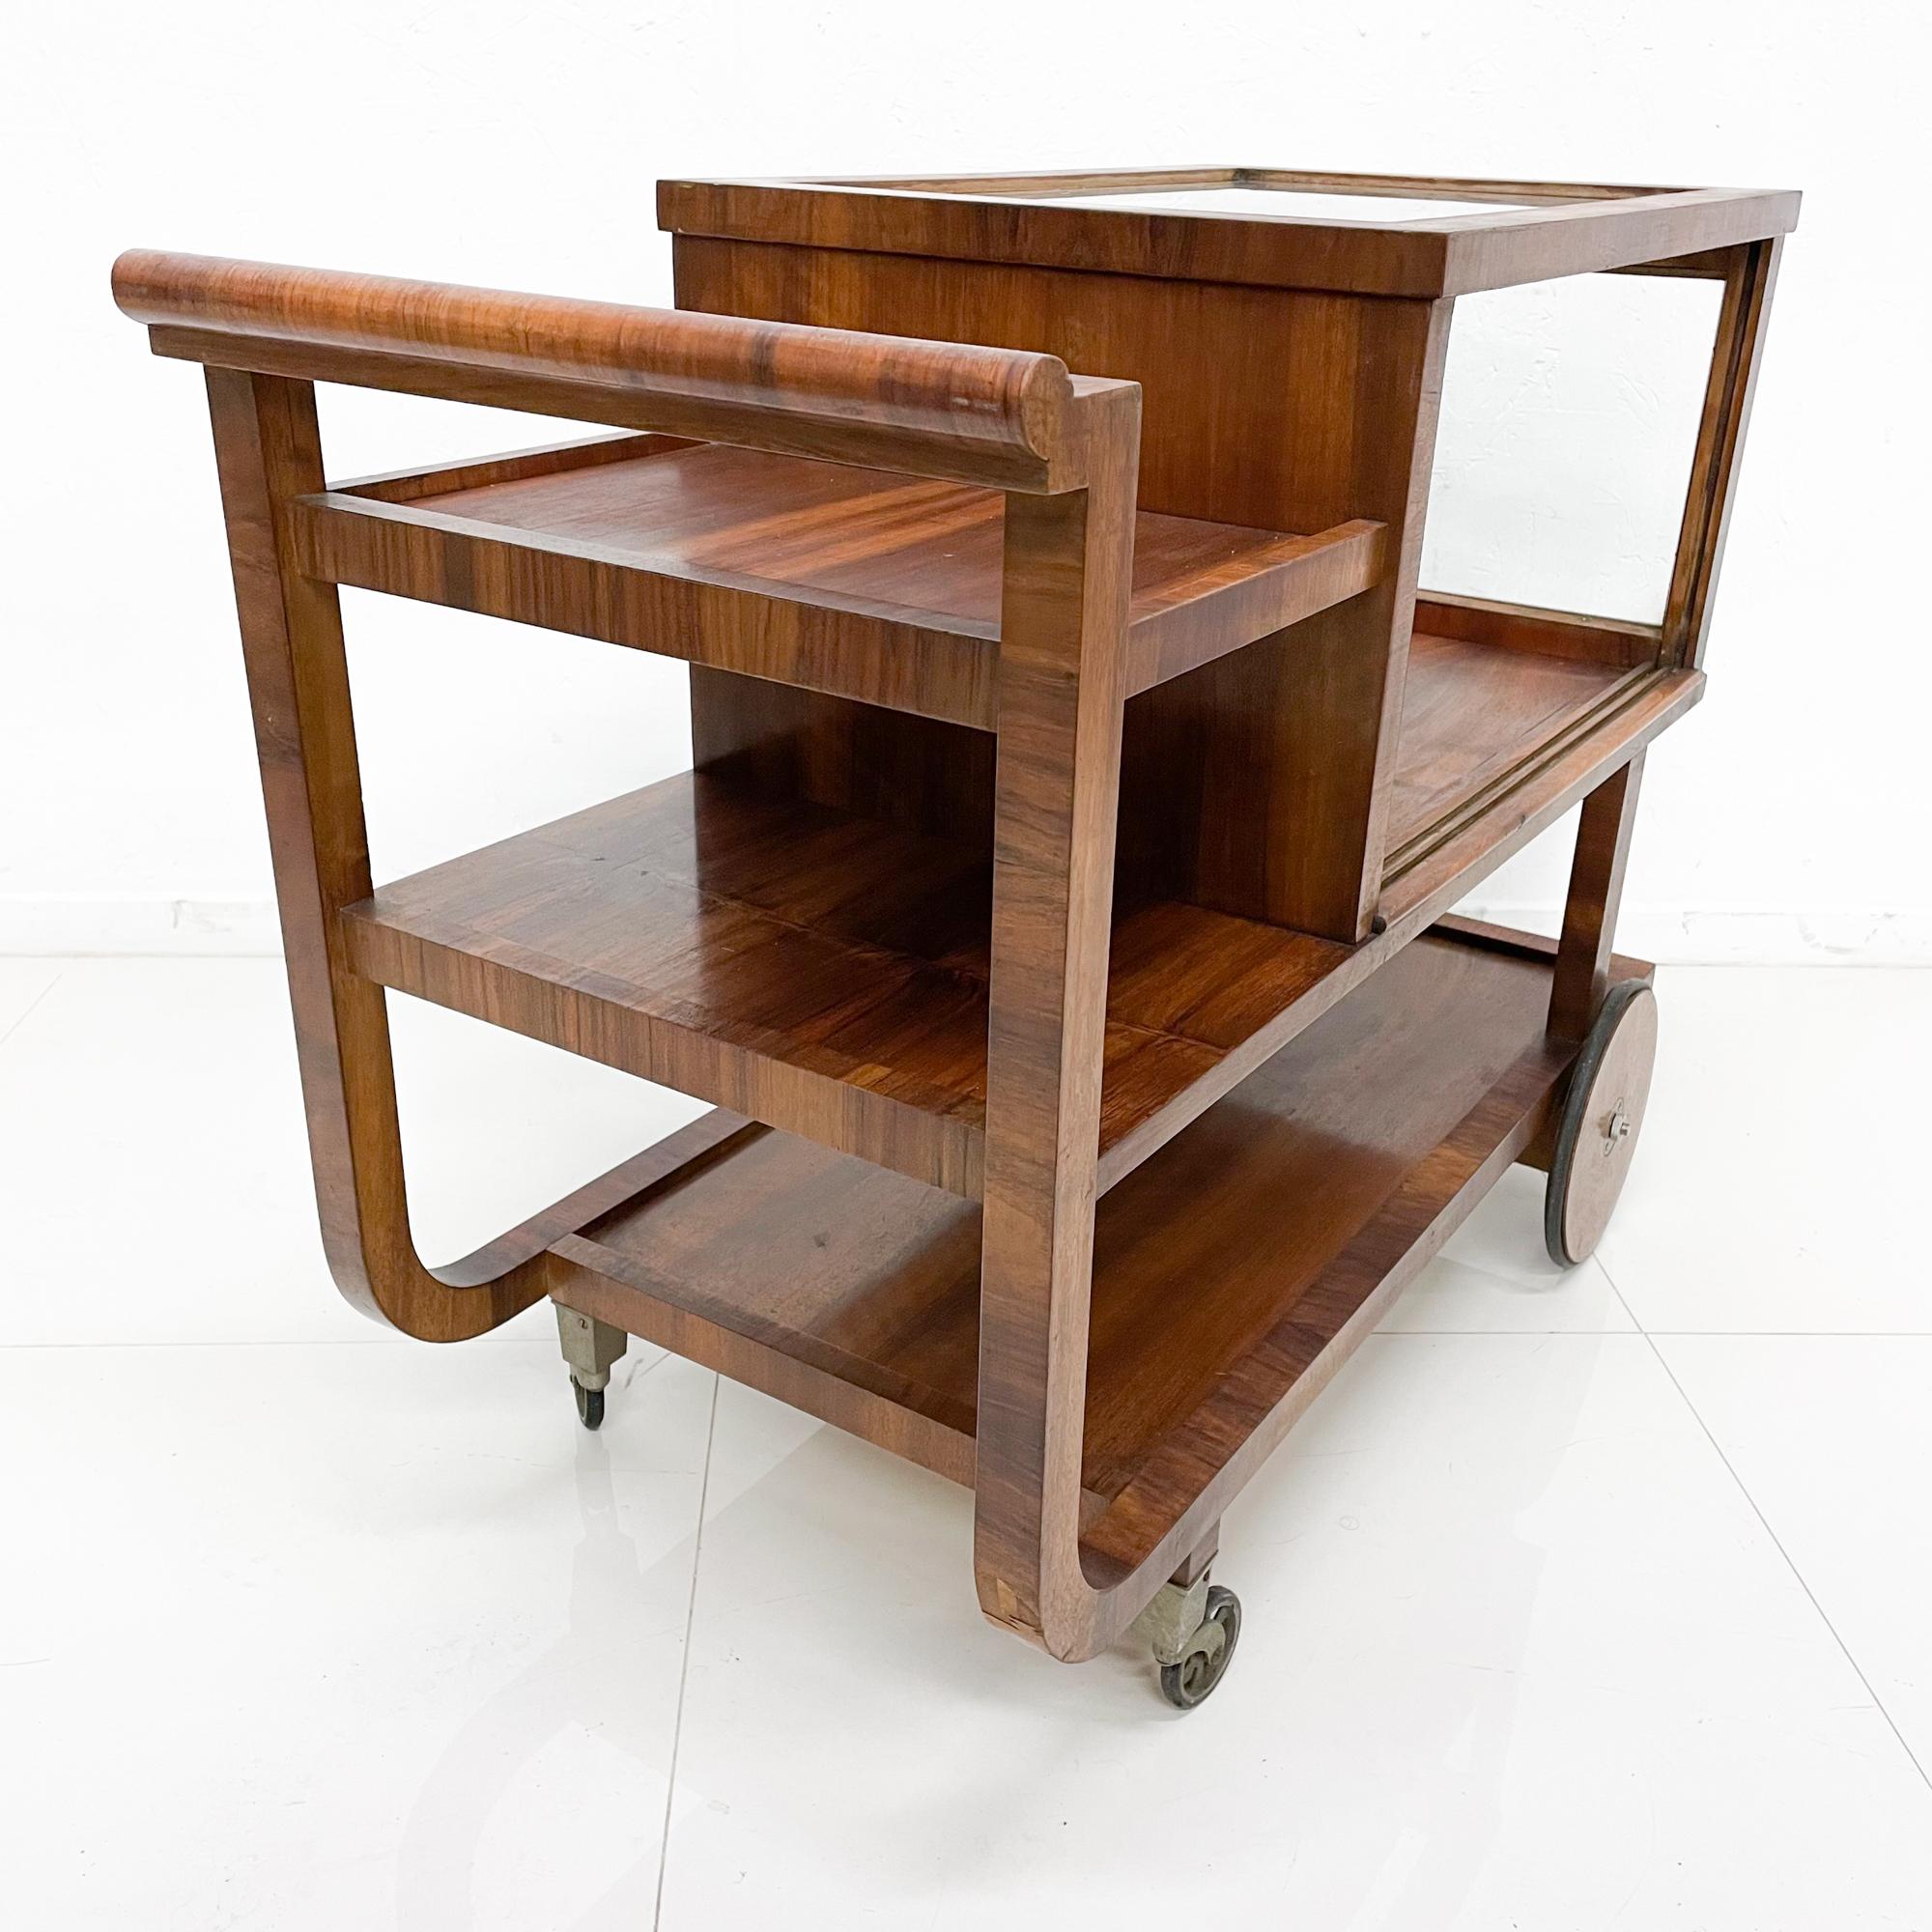 Trolley Service Bar Cart or Bakery Table in Rosewood Art Deco Period 1